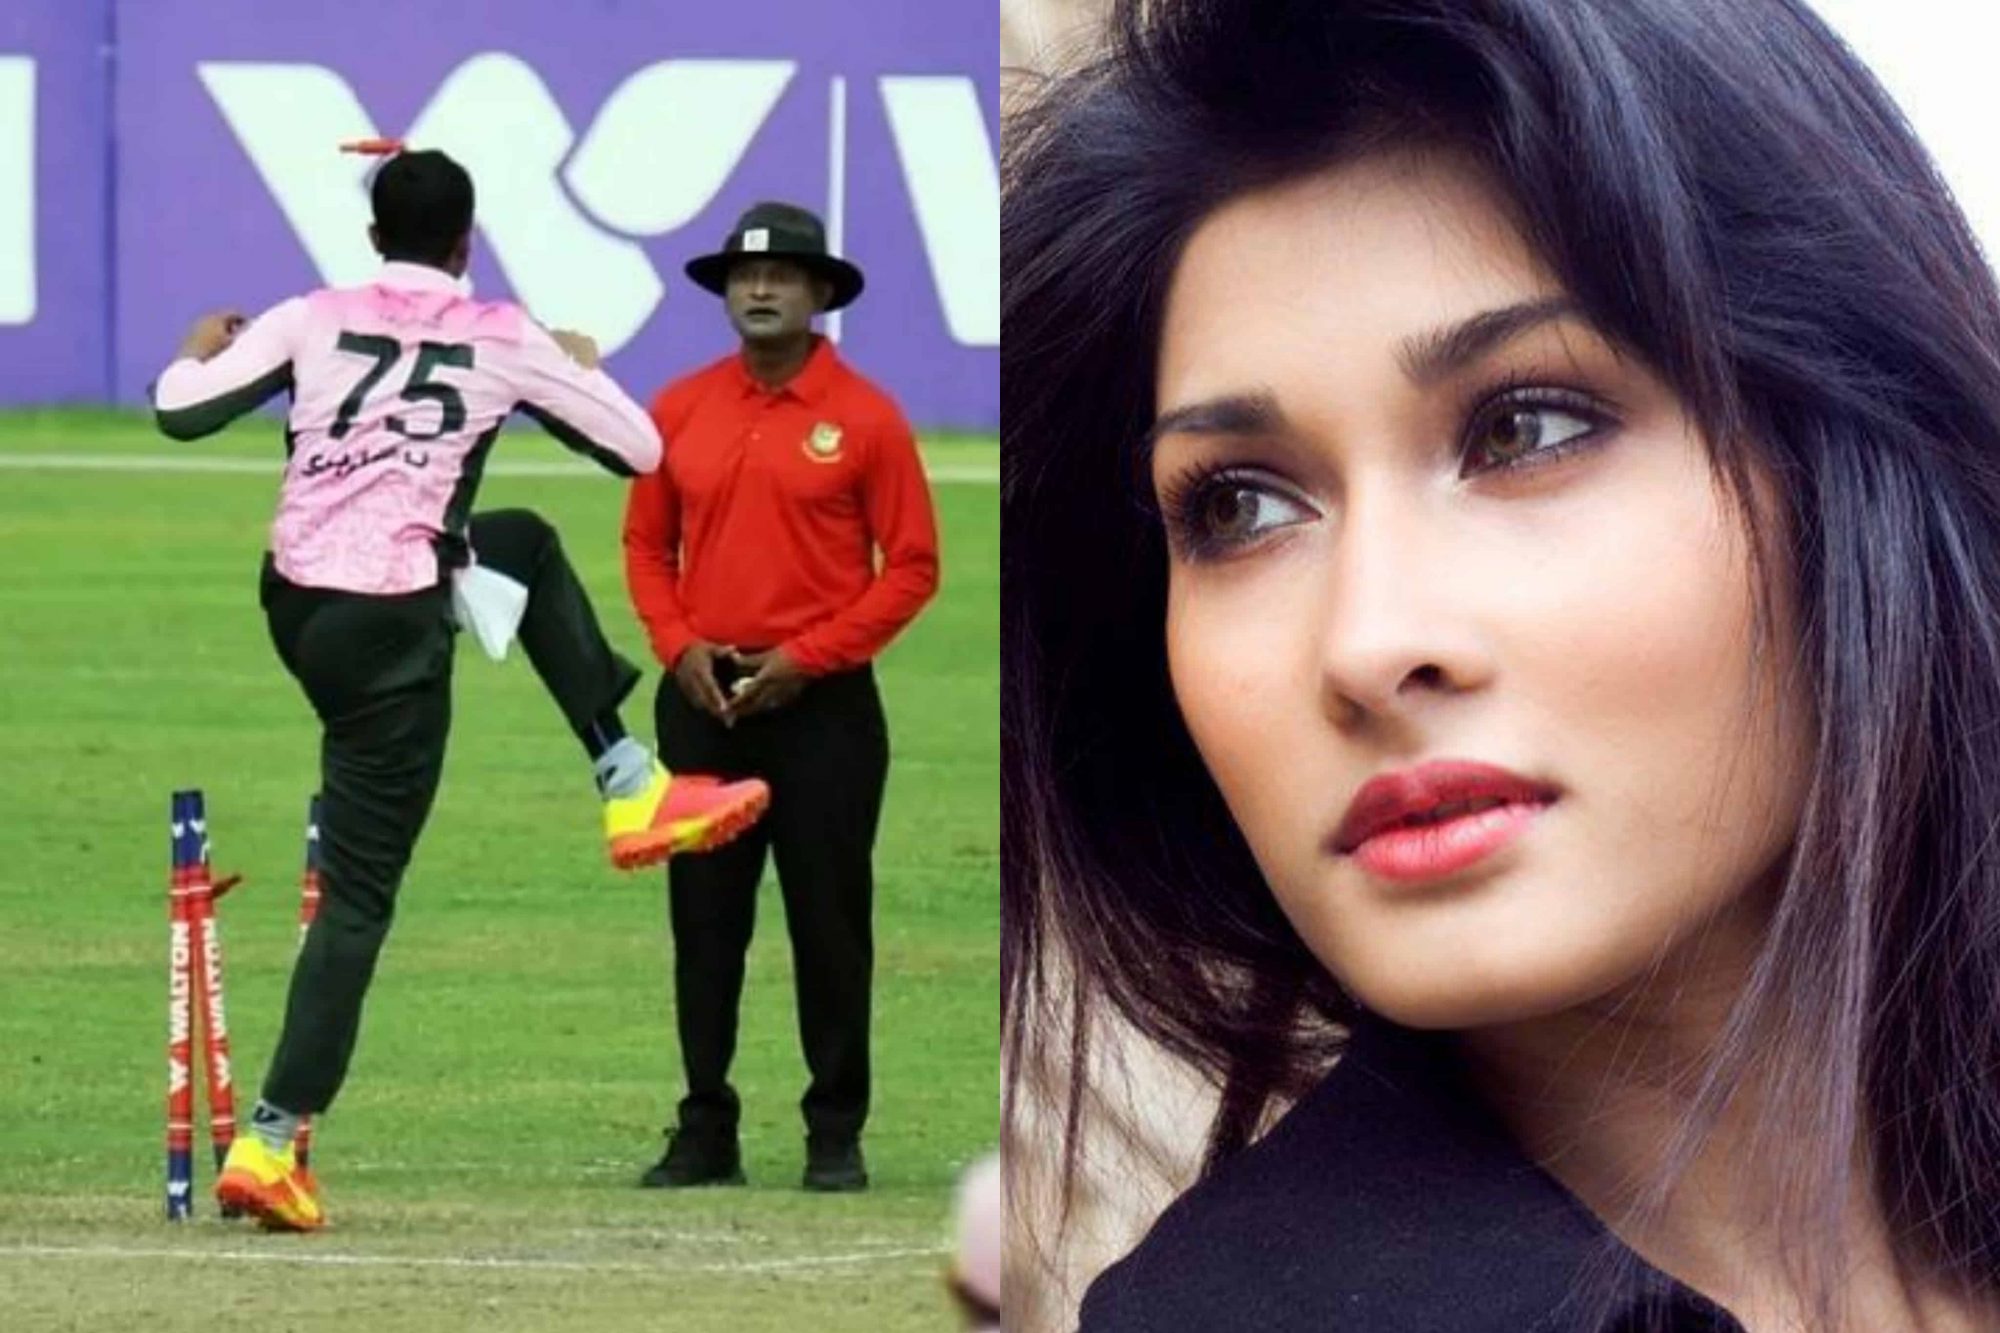 "Plot Against Shakib To Portray Him As The Villain" - Shakib Al Hasan's Wife Reacts After Controversial On-Field Action